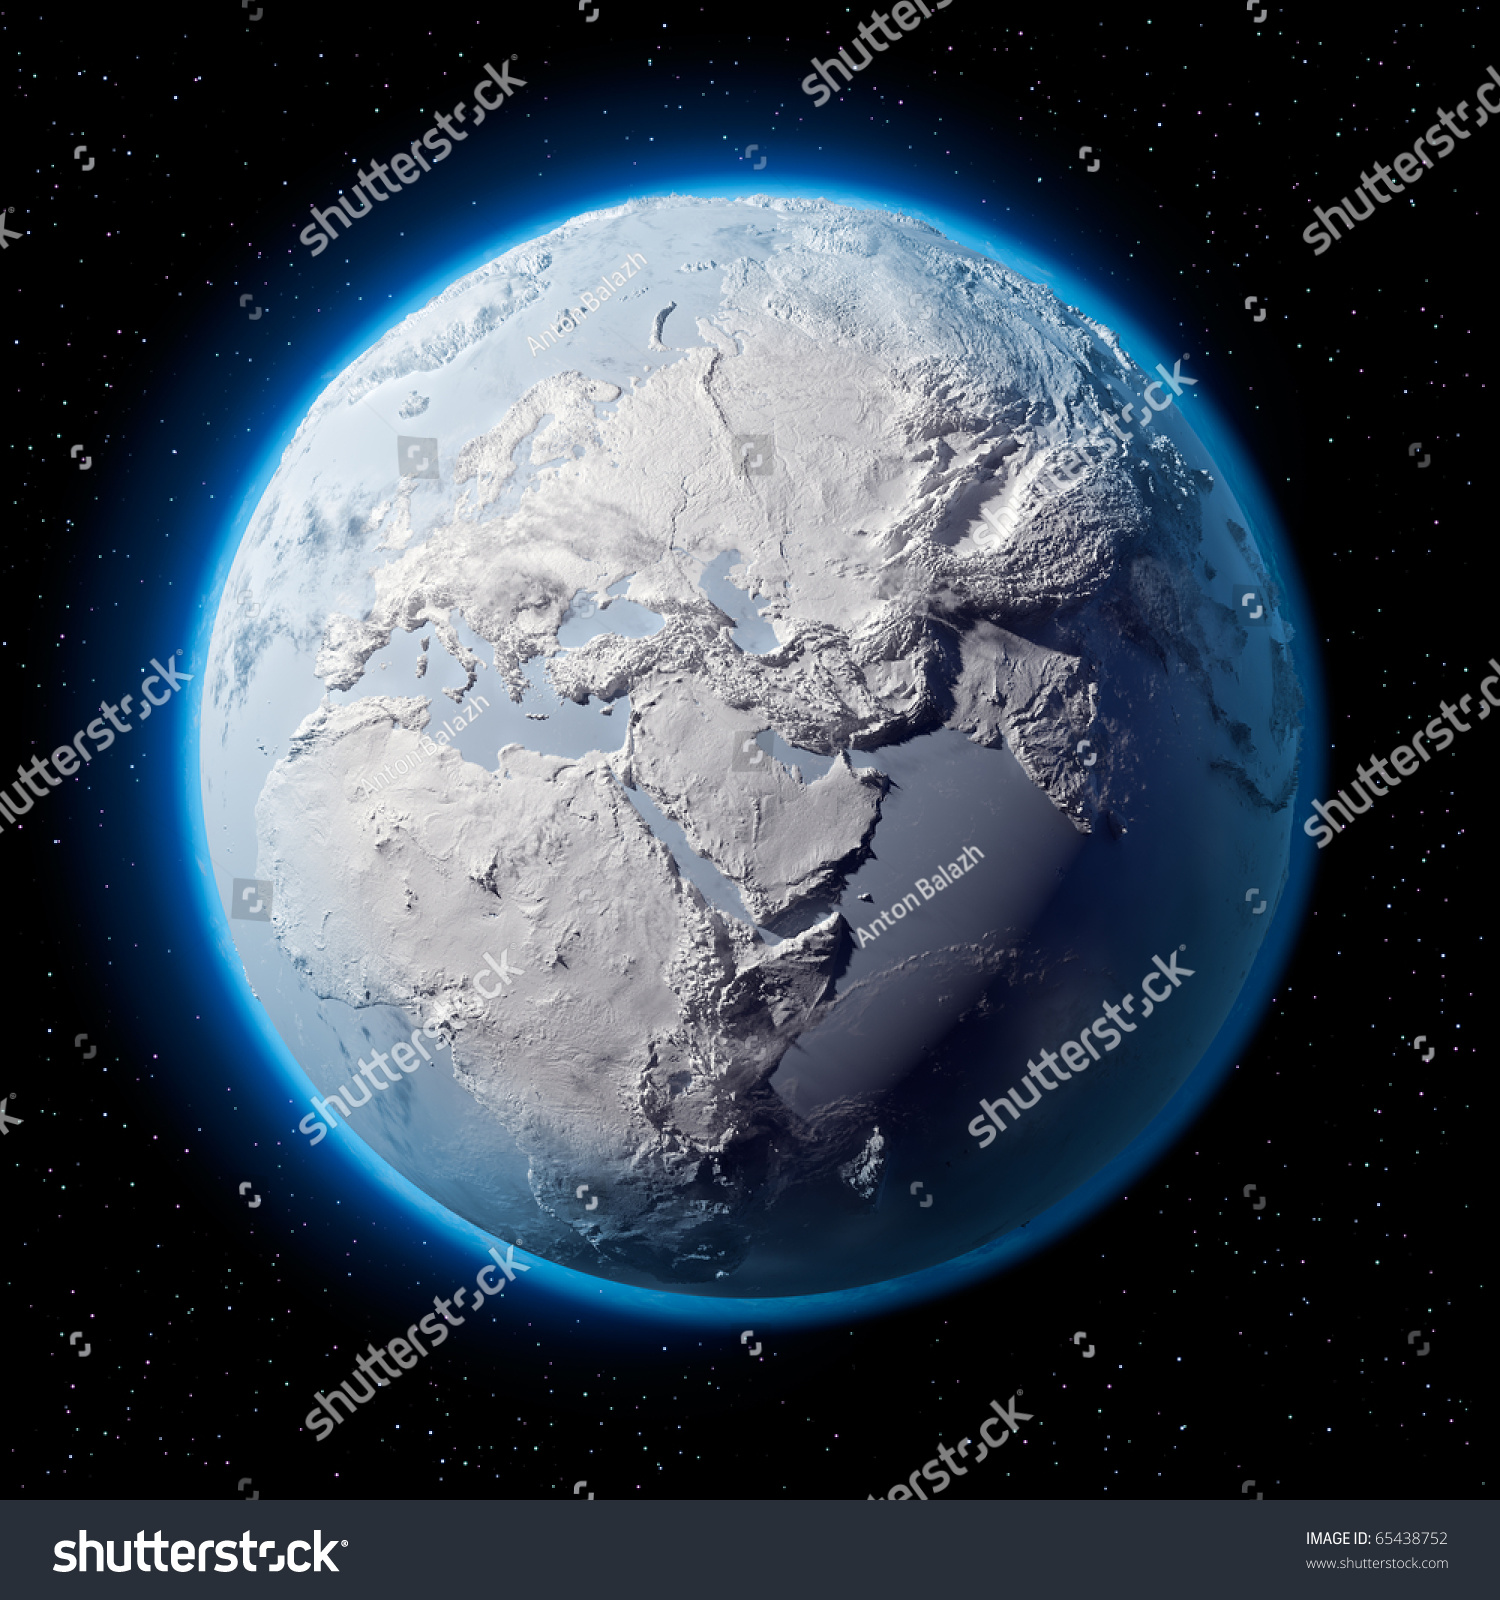 http://image.shutterstock.com/z/stock-photo-winter-planet-earth-covered-in-snow-and-ice-planet-with-a-real-detailed-terrain-soft-shadows-and-65438752.jpg